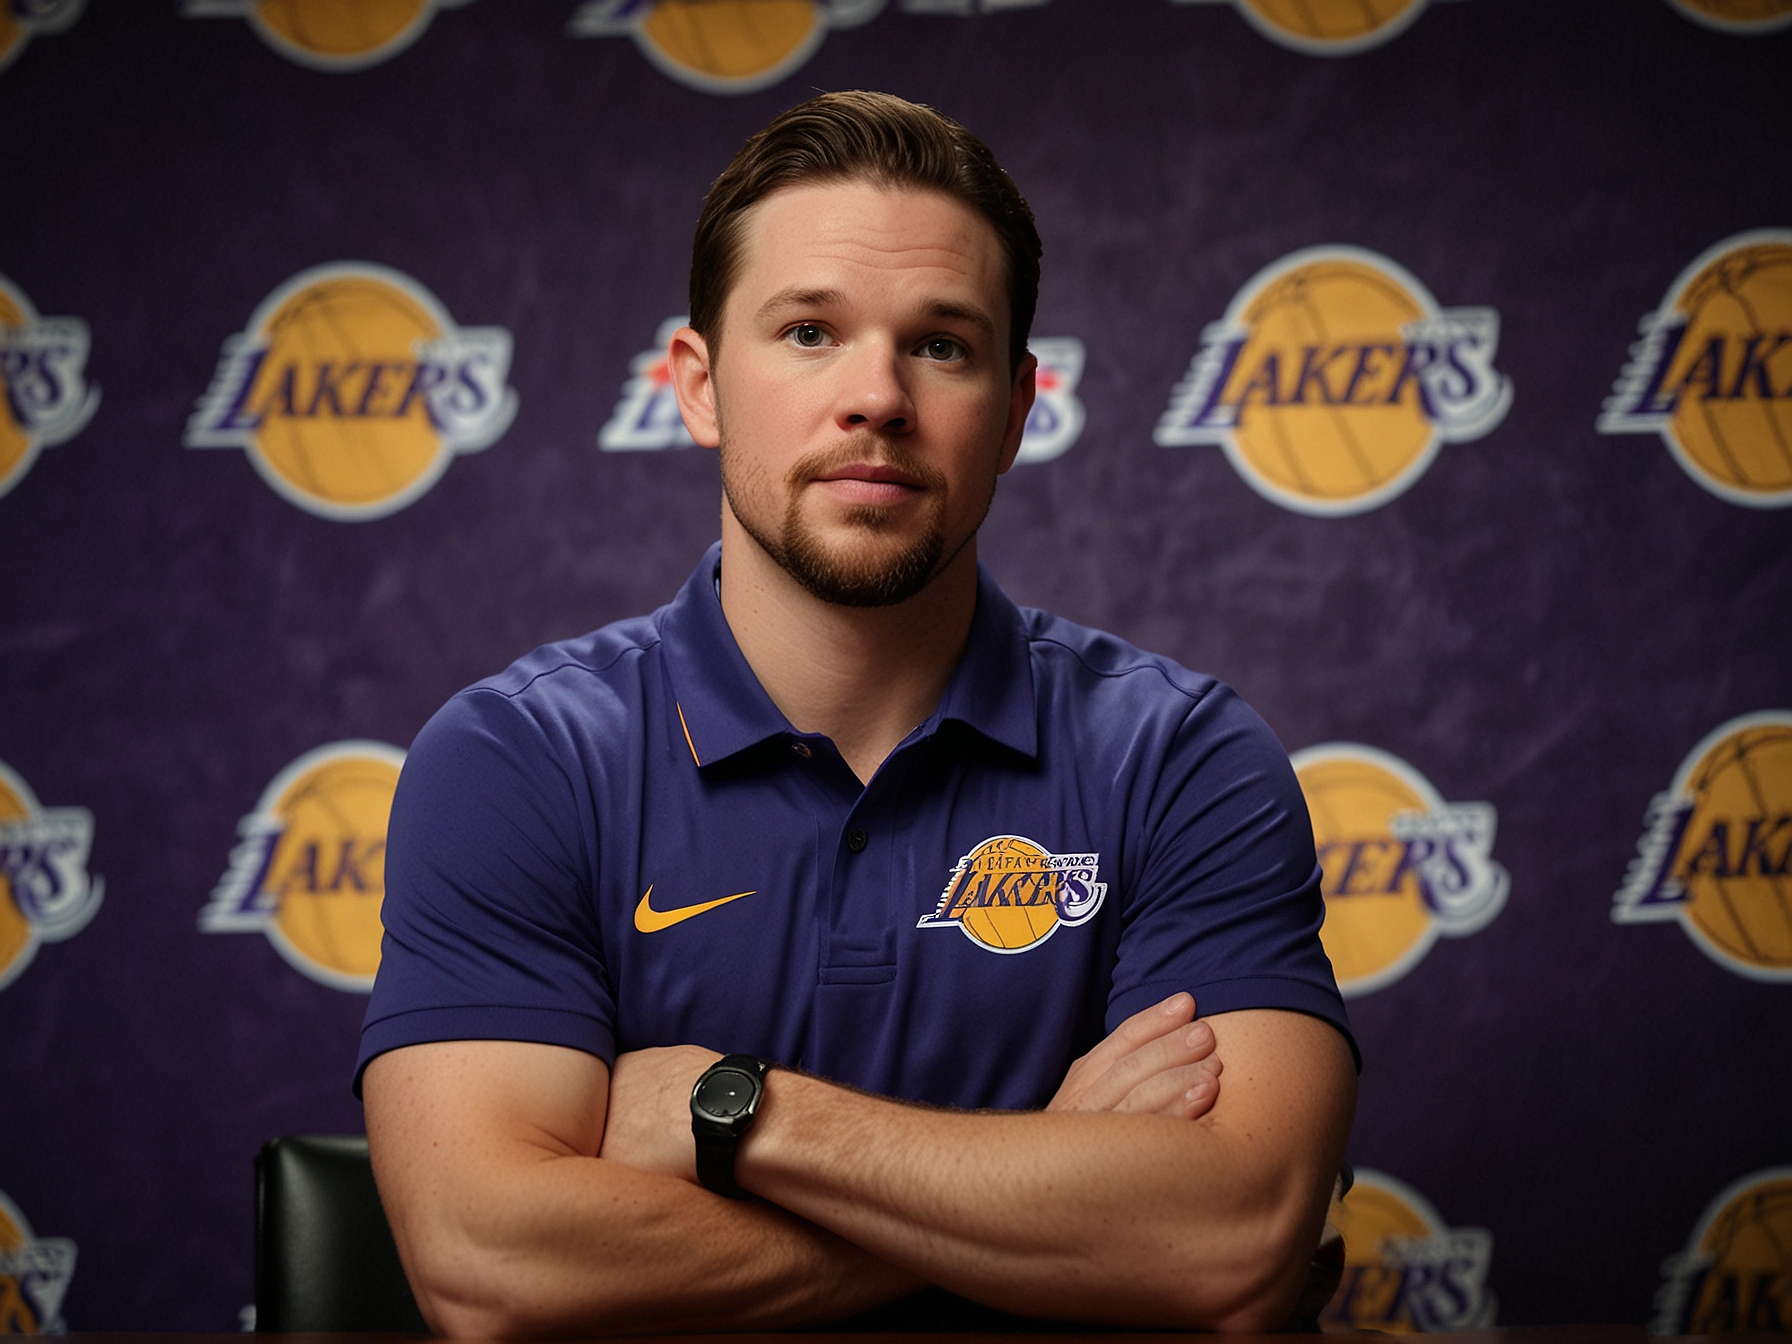 JJ Reddick, the newly appointed head coach of the Los Angeles Lakers, is seen confidently addressing the media. The backdrop features the Lakers' iconic logo, symbolizing a new era for the team.